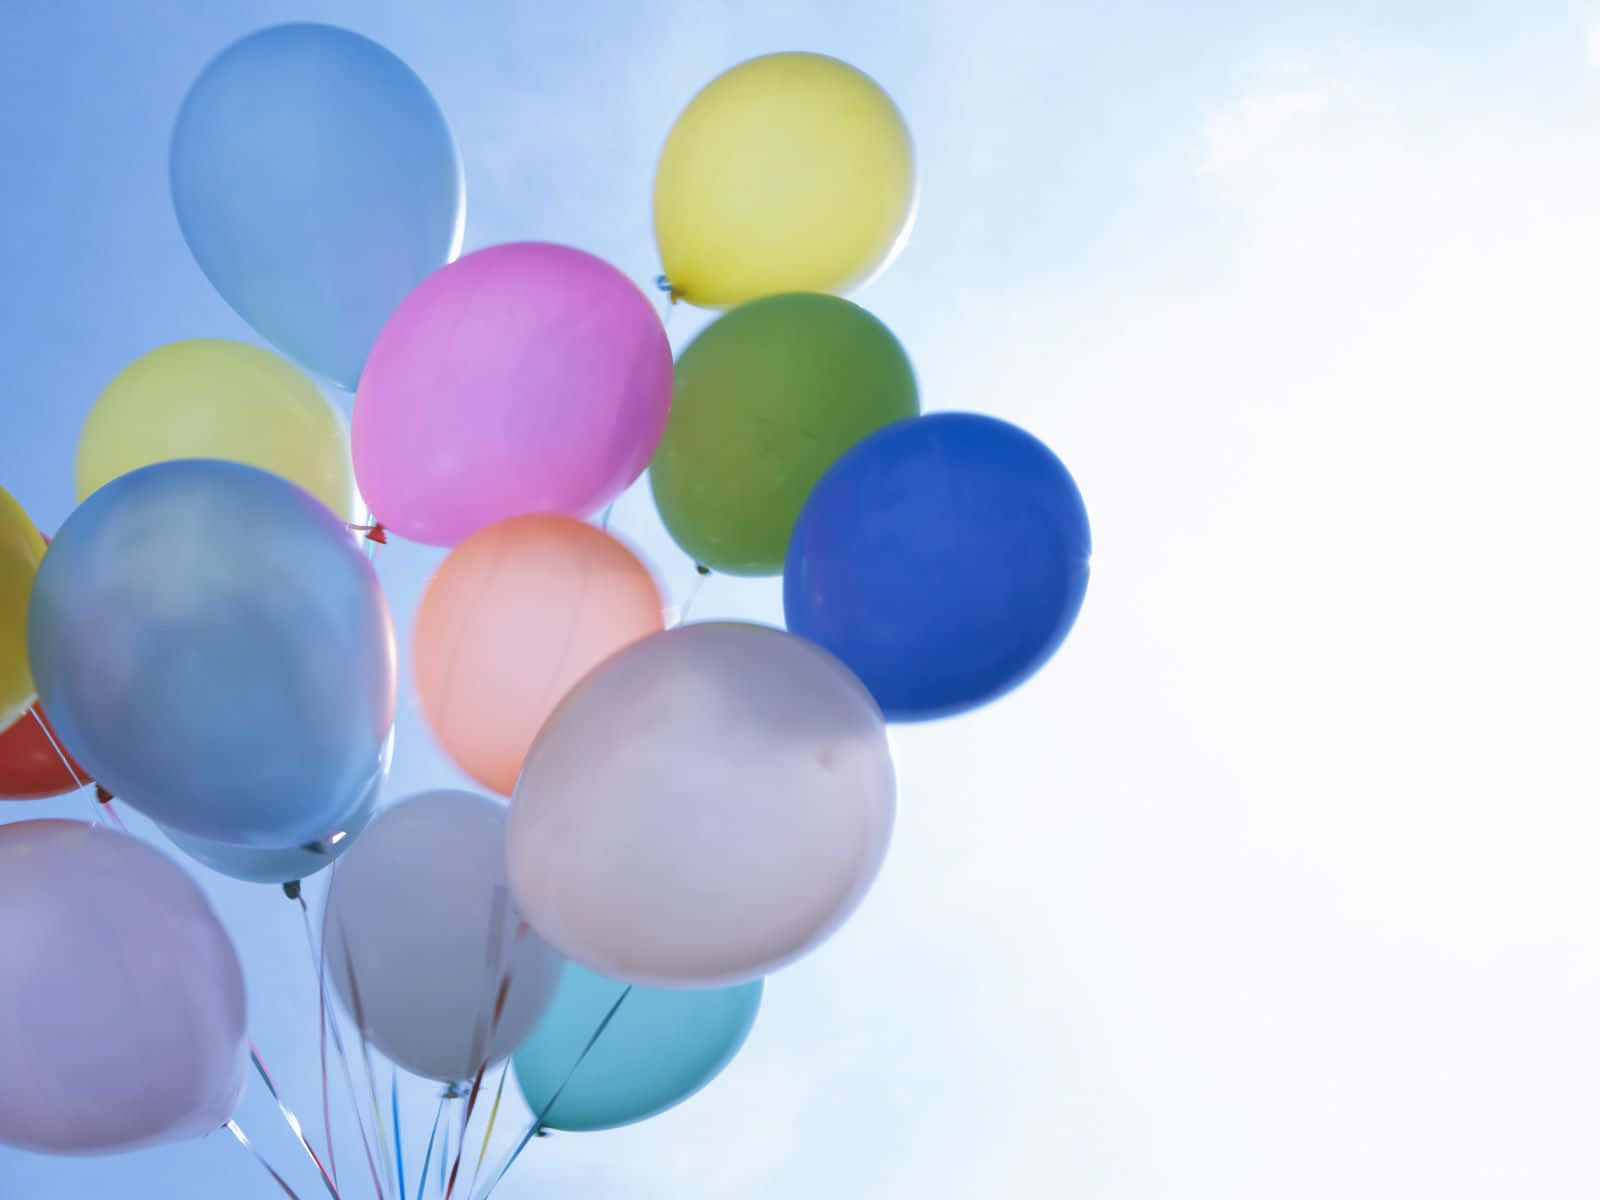 Celebrate with Colorful Birthday Balloons